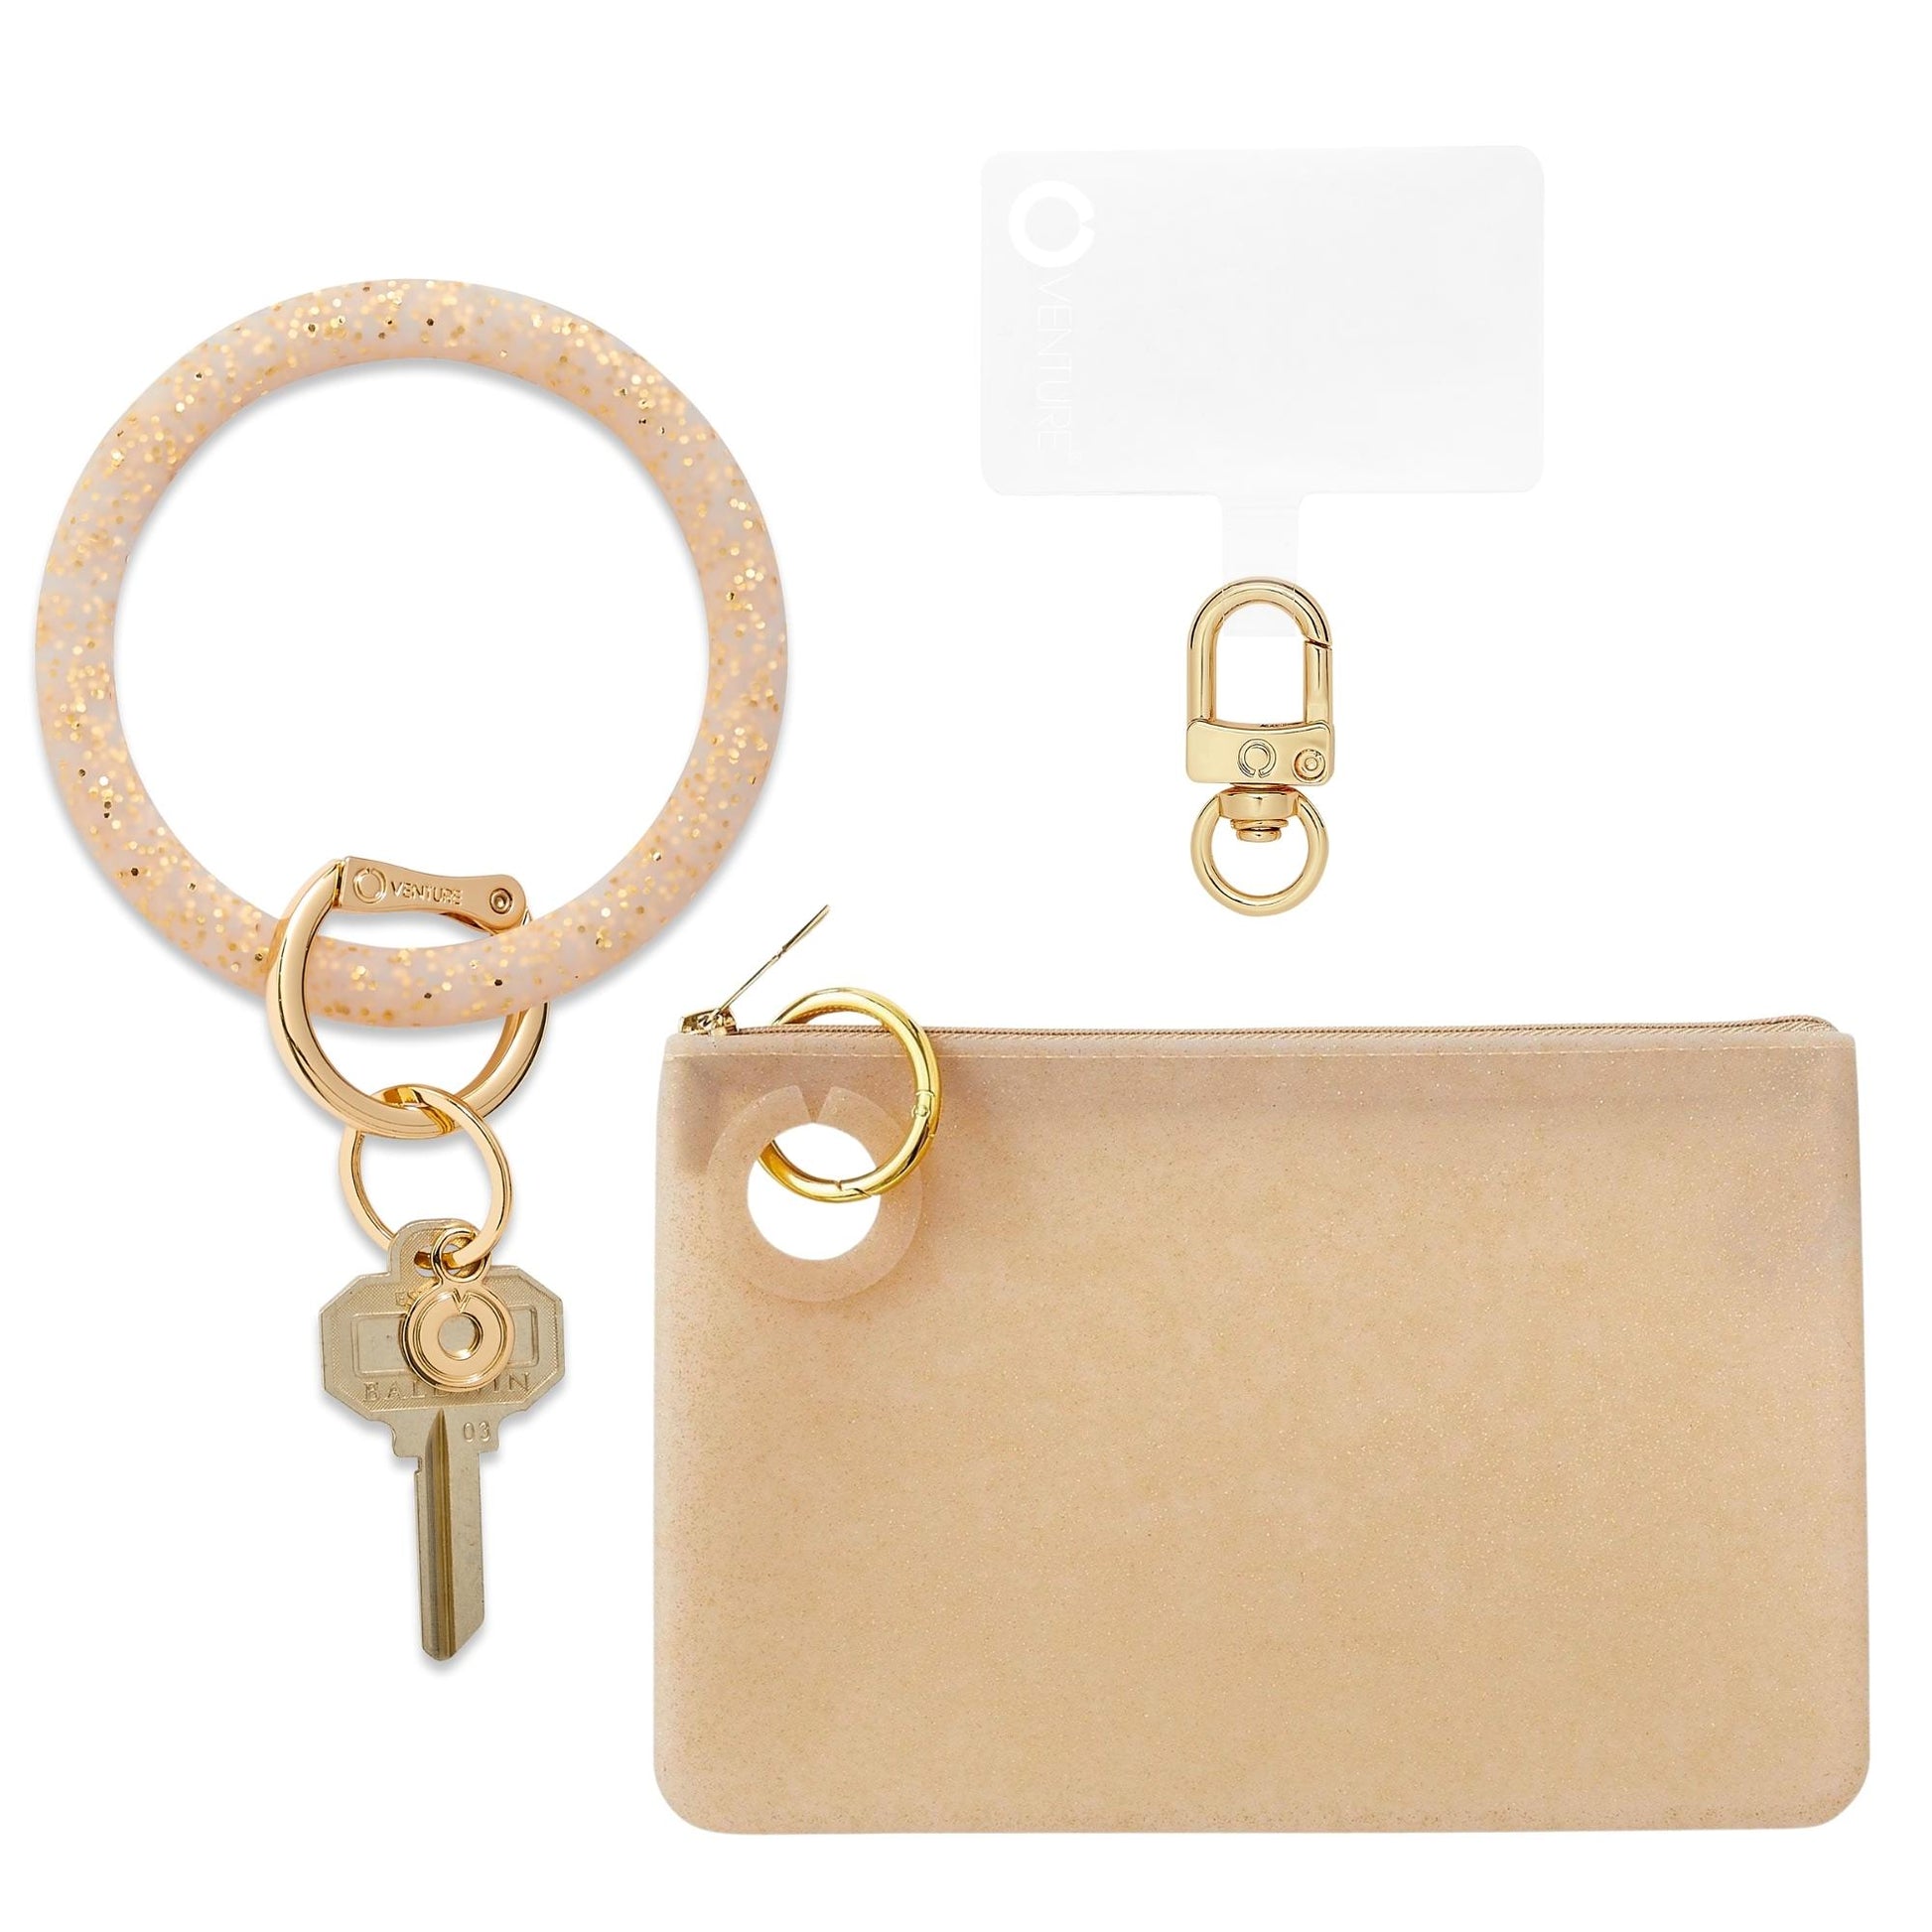 Stylish Large Pouch Wristlet with Phone Holder in gold confetti.